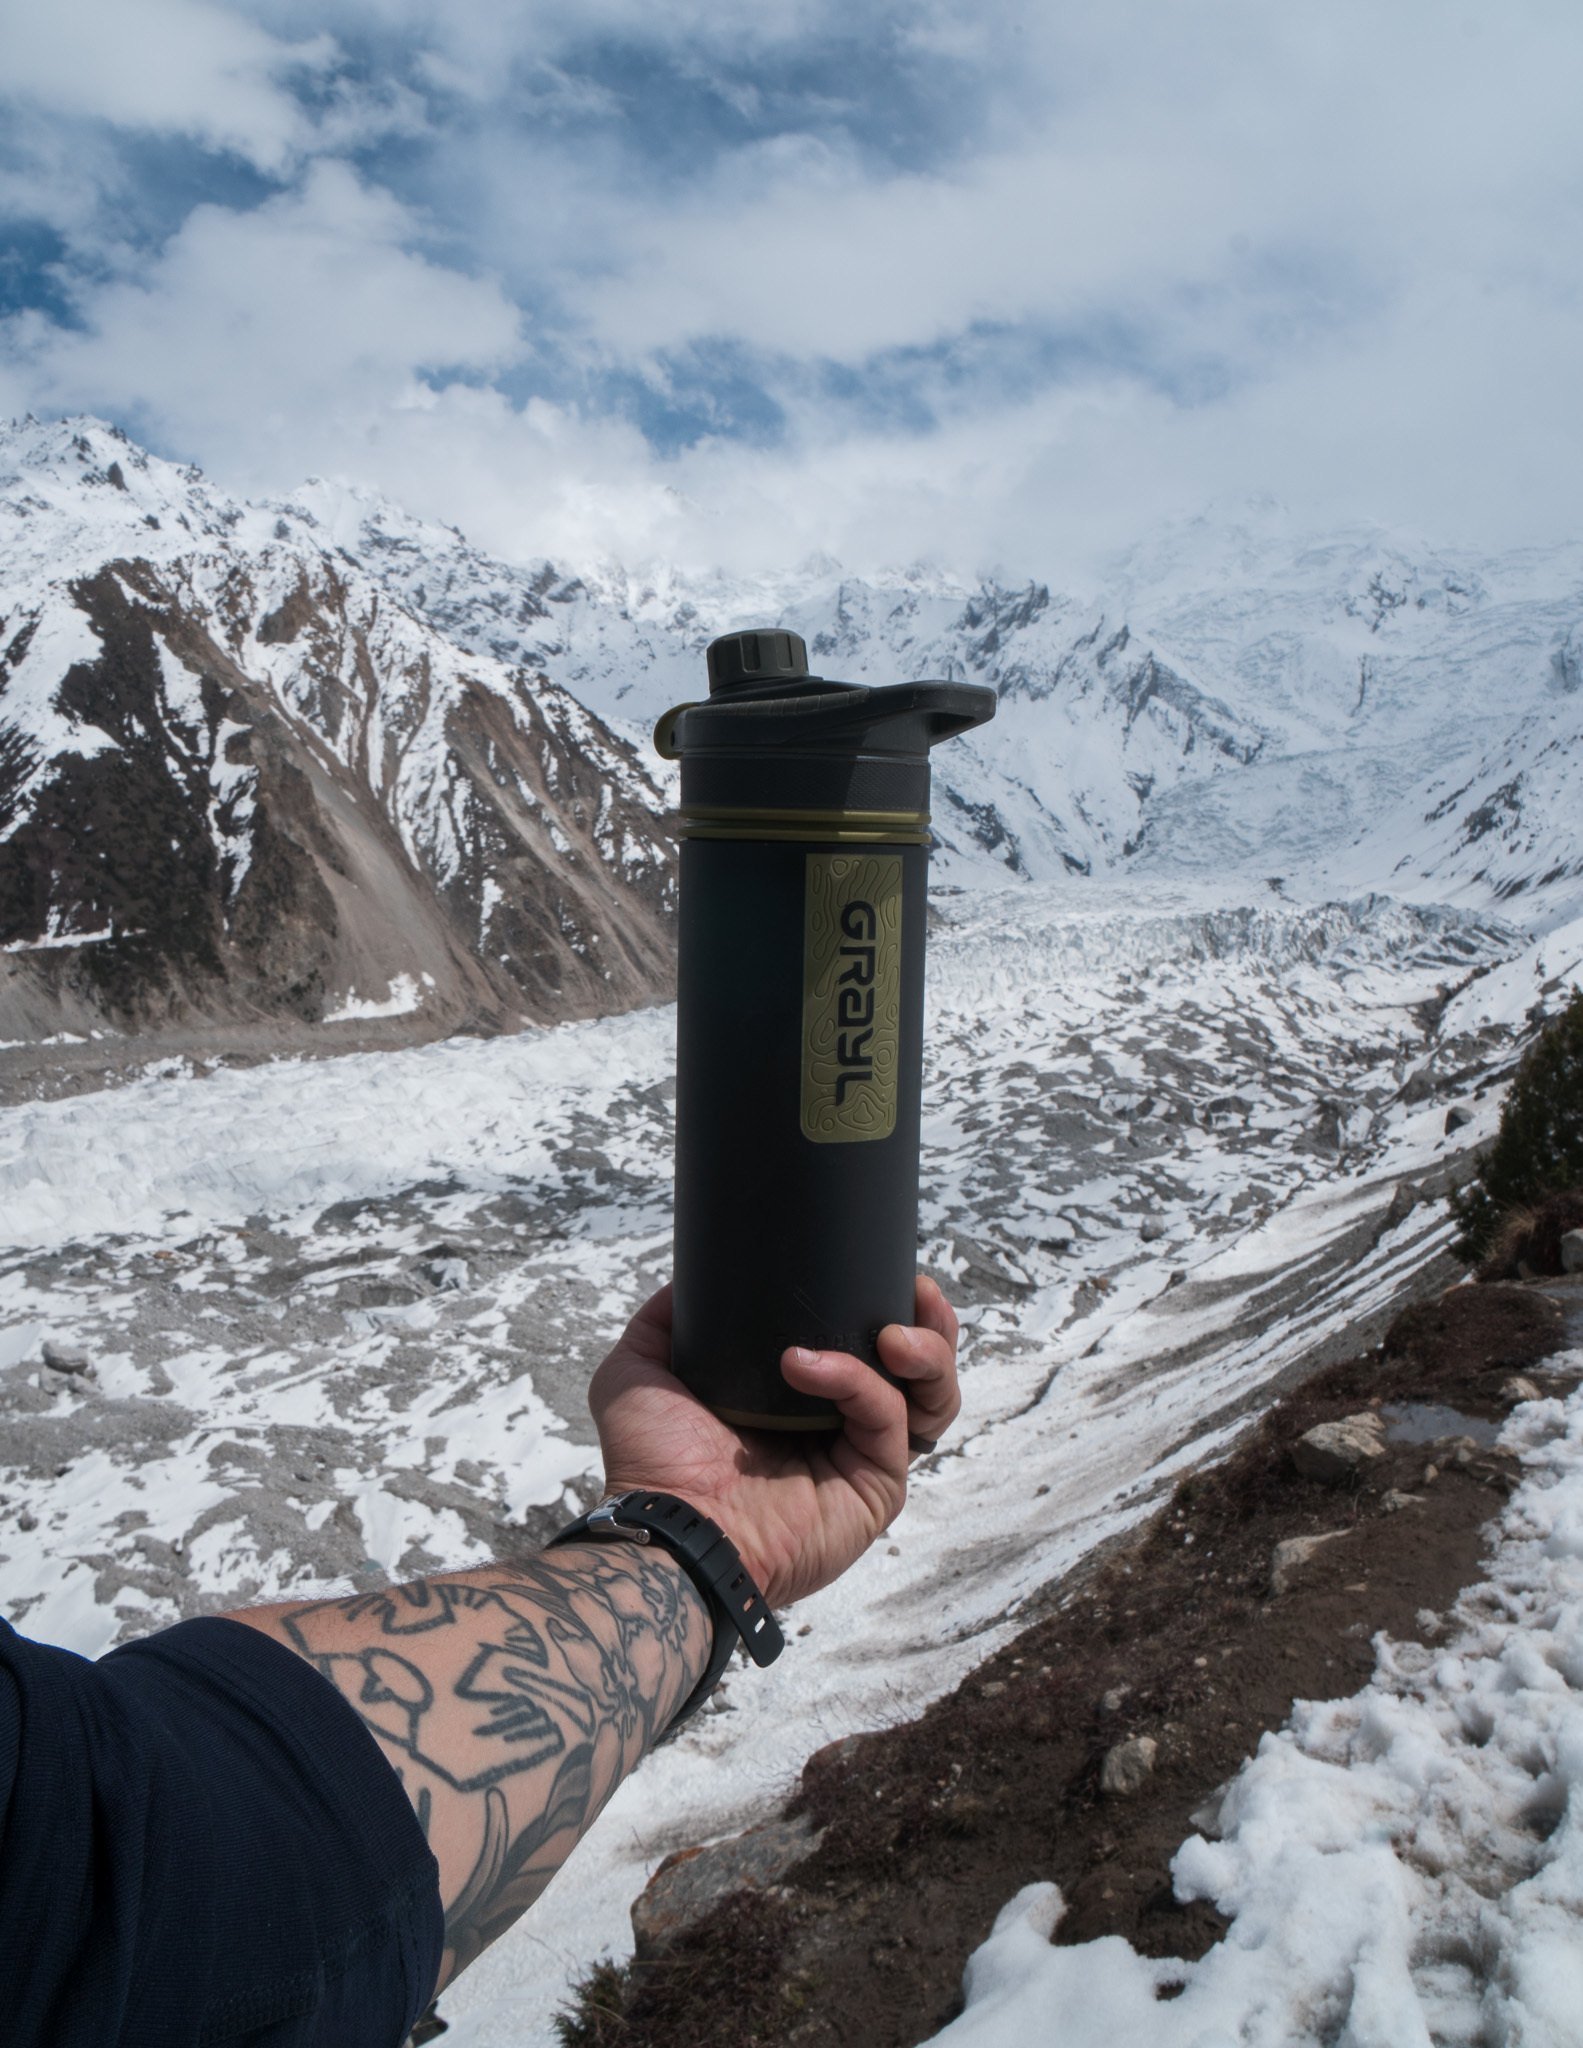 AirHelp: The Best Filtered Water Bottle for Travel